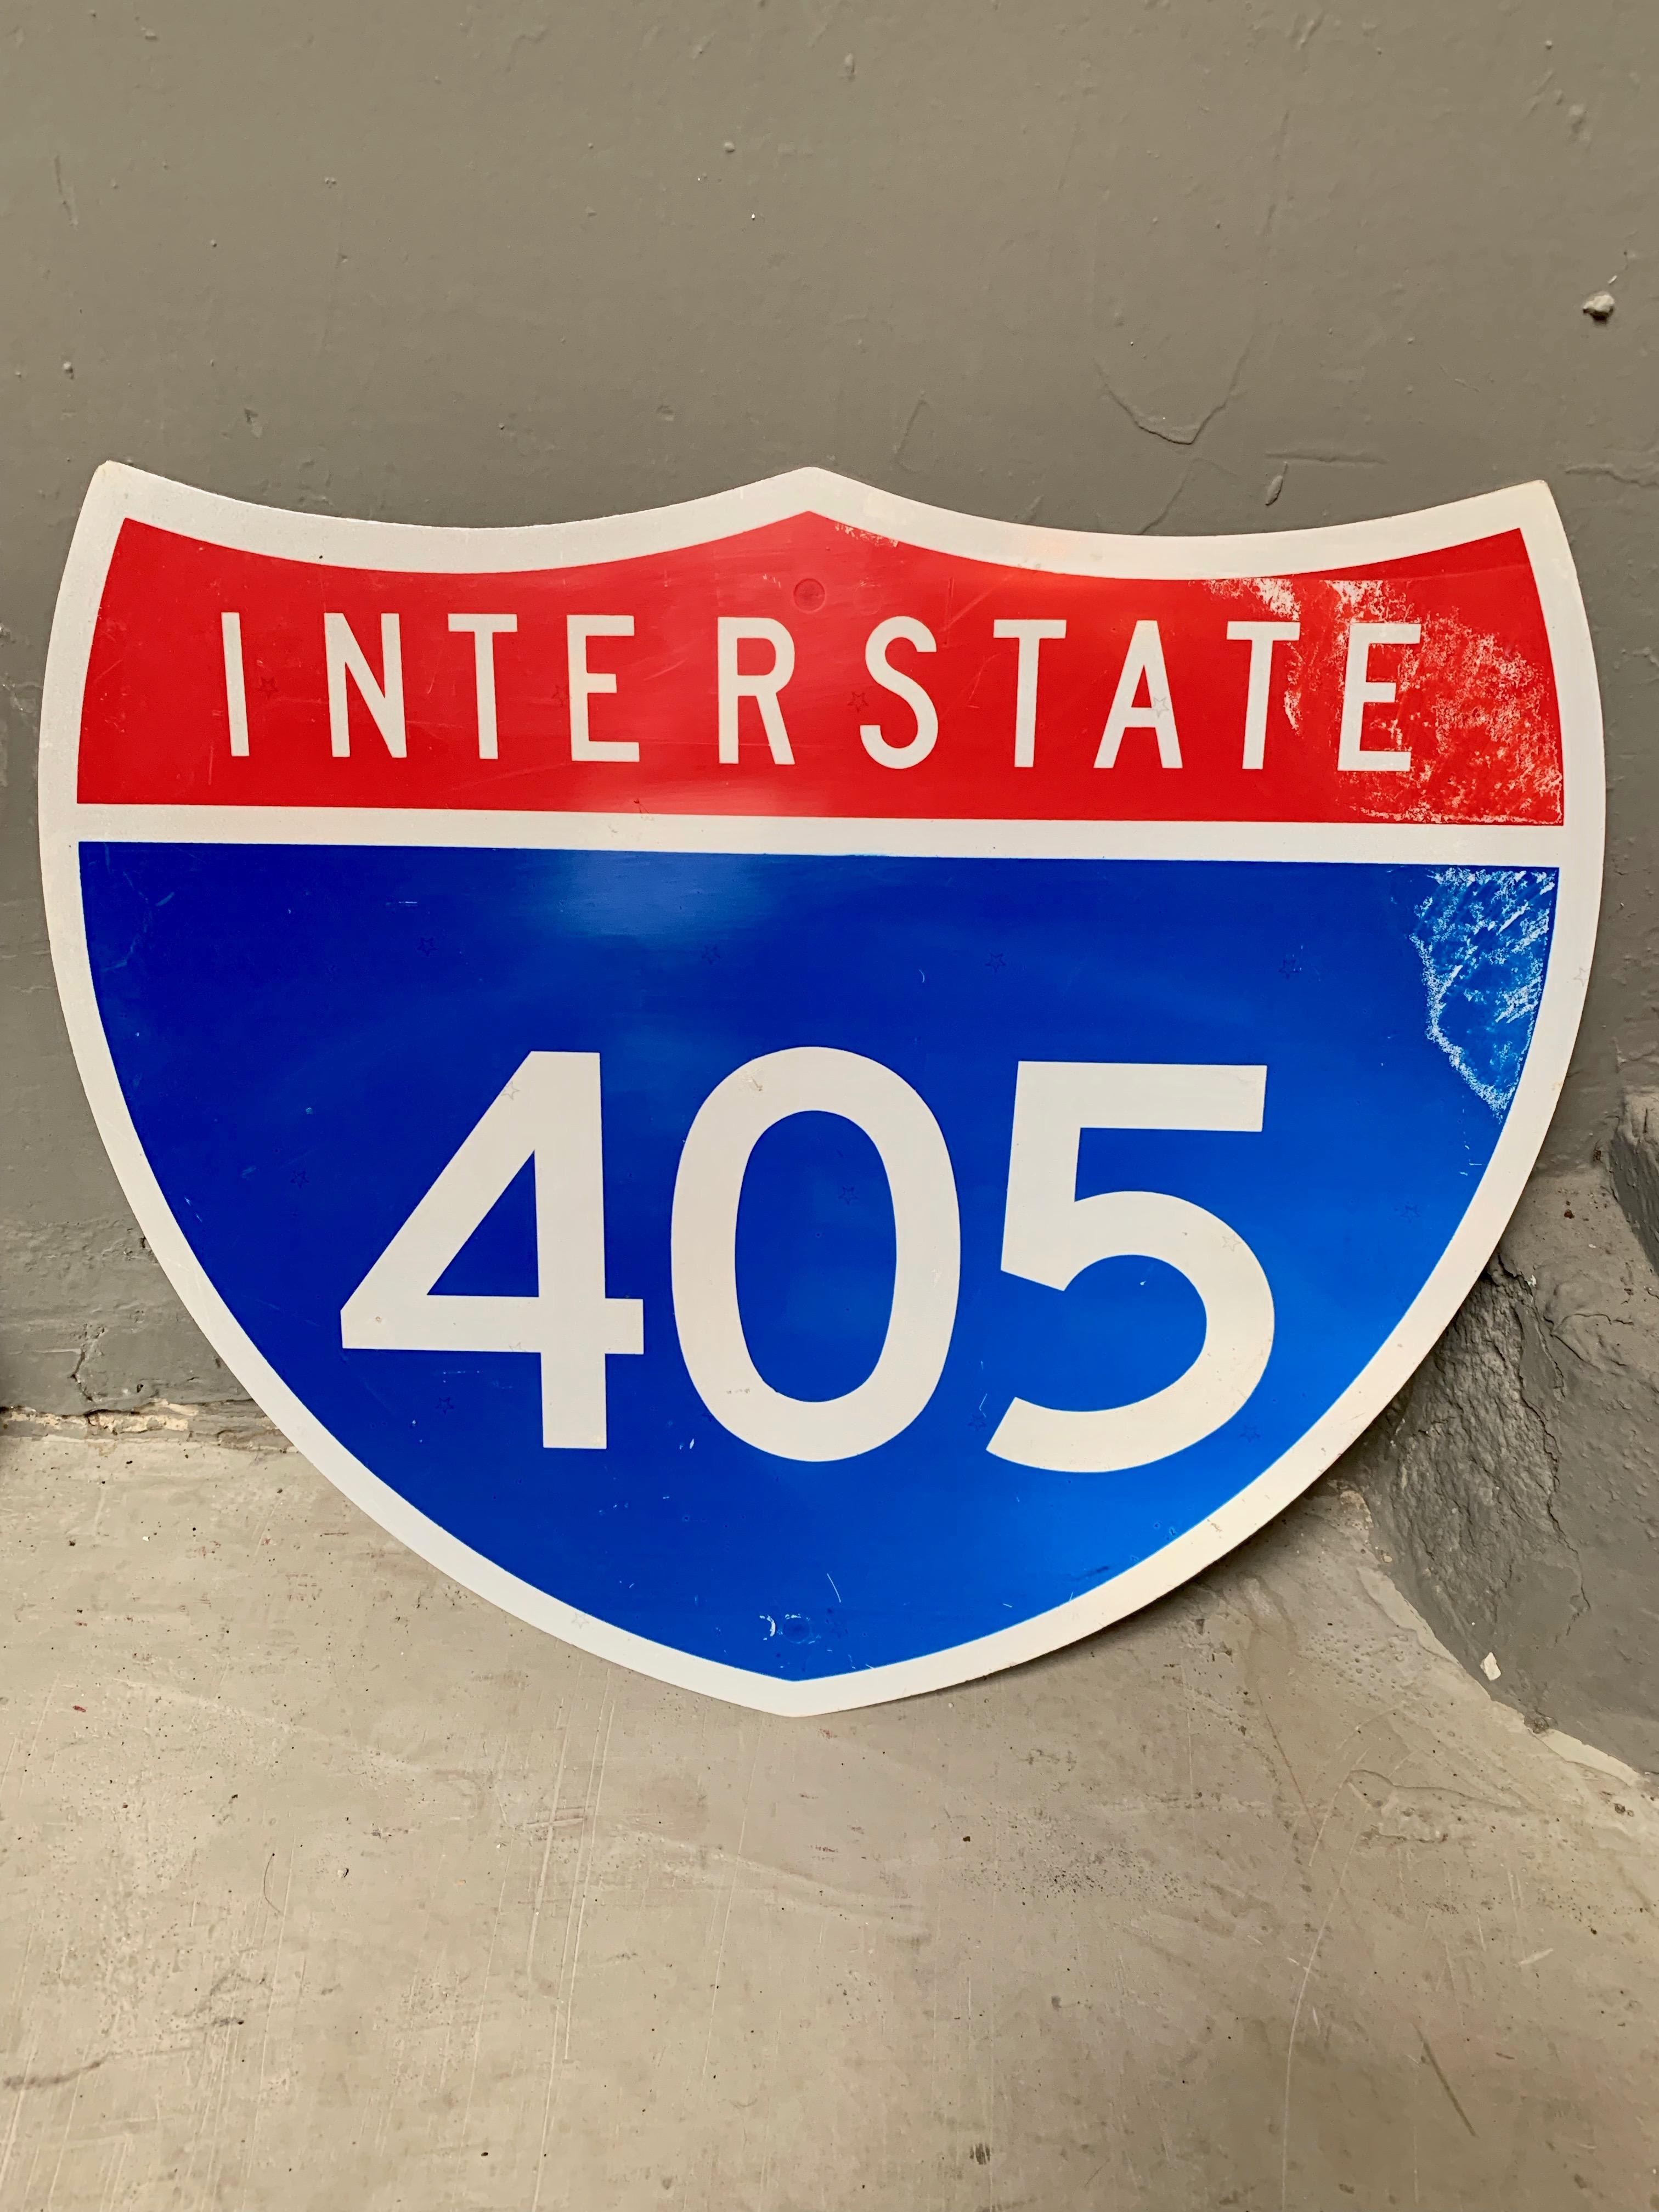 Interstate 405 freeway sign. Cool piece of California signage. Good vintage condition. Little stars imprinted thought the metal sign.